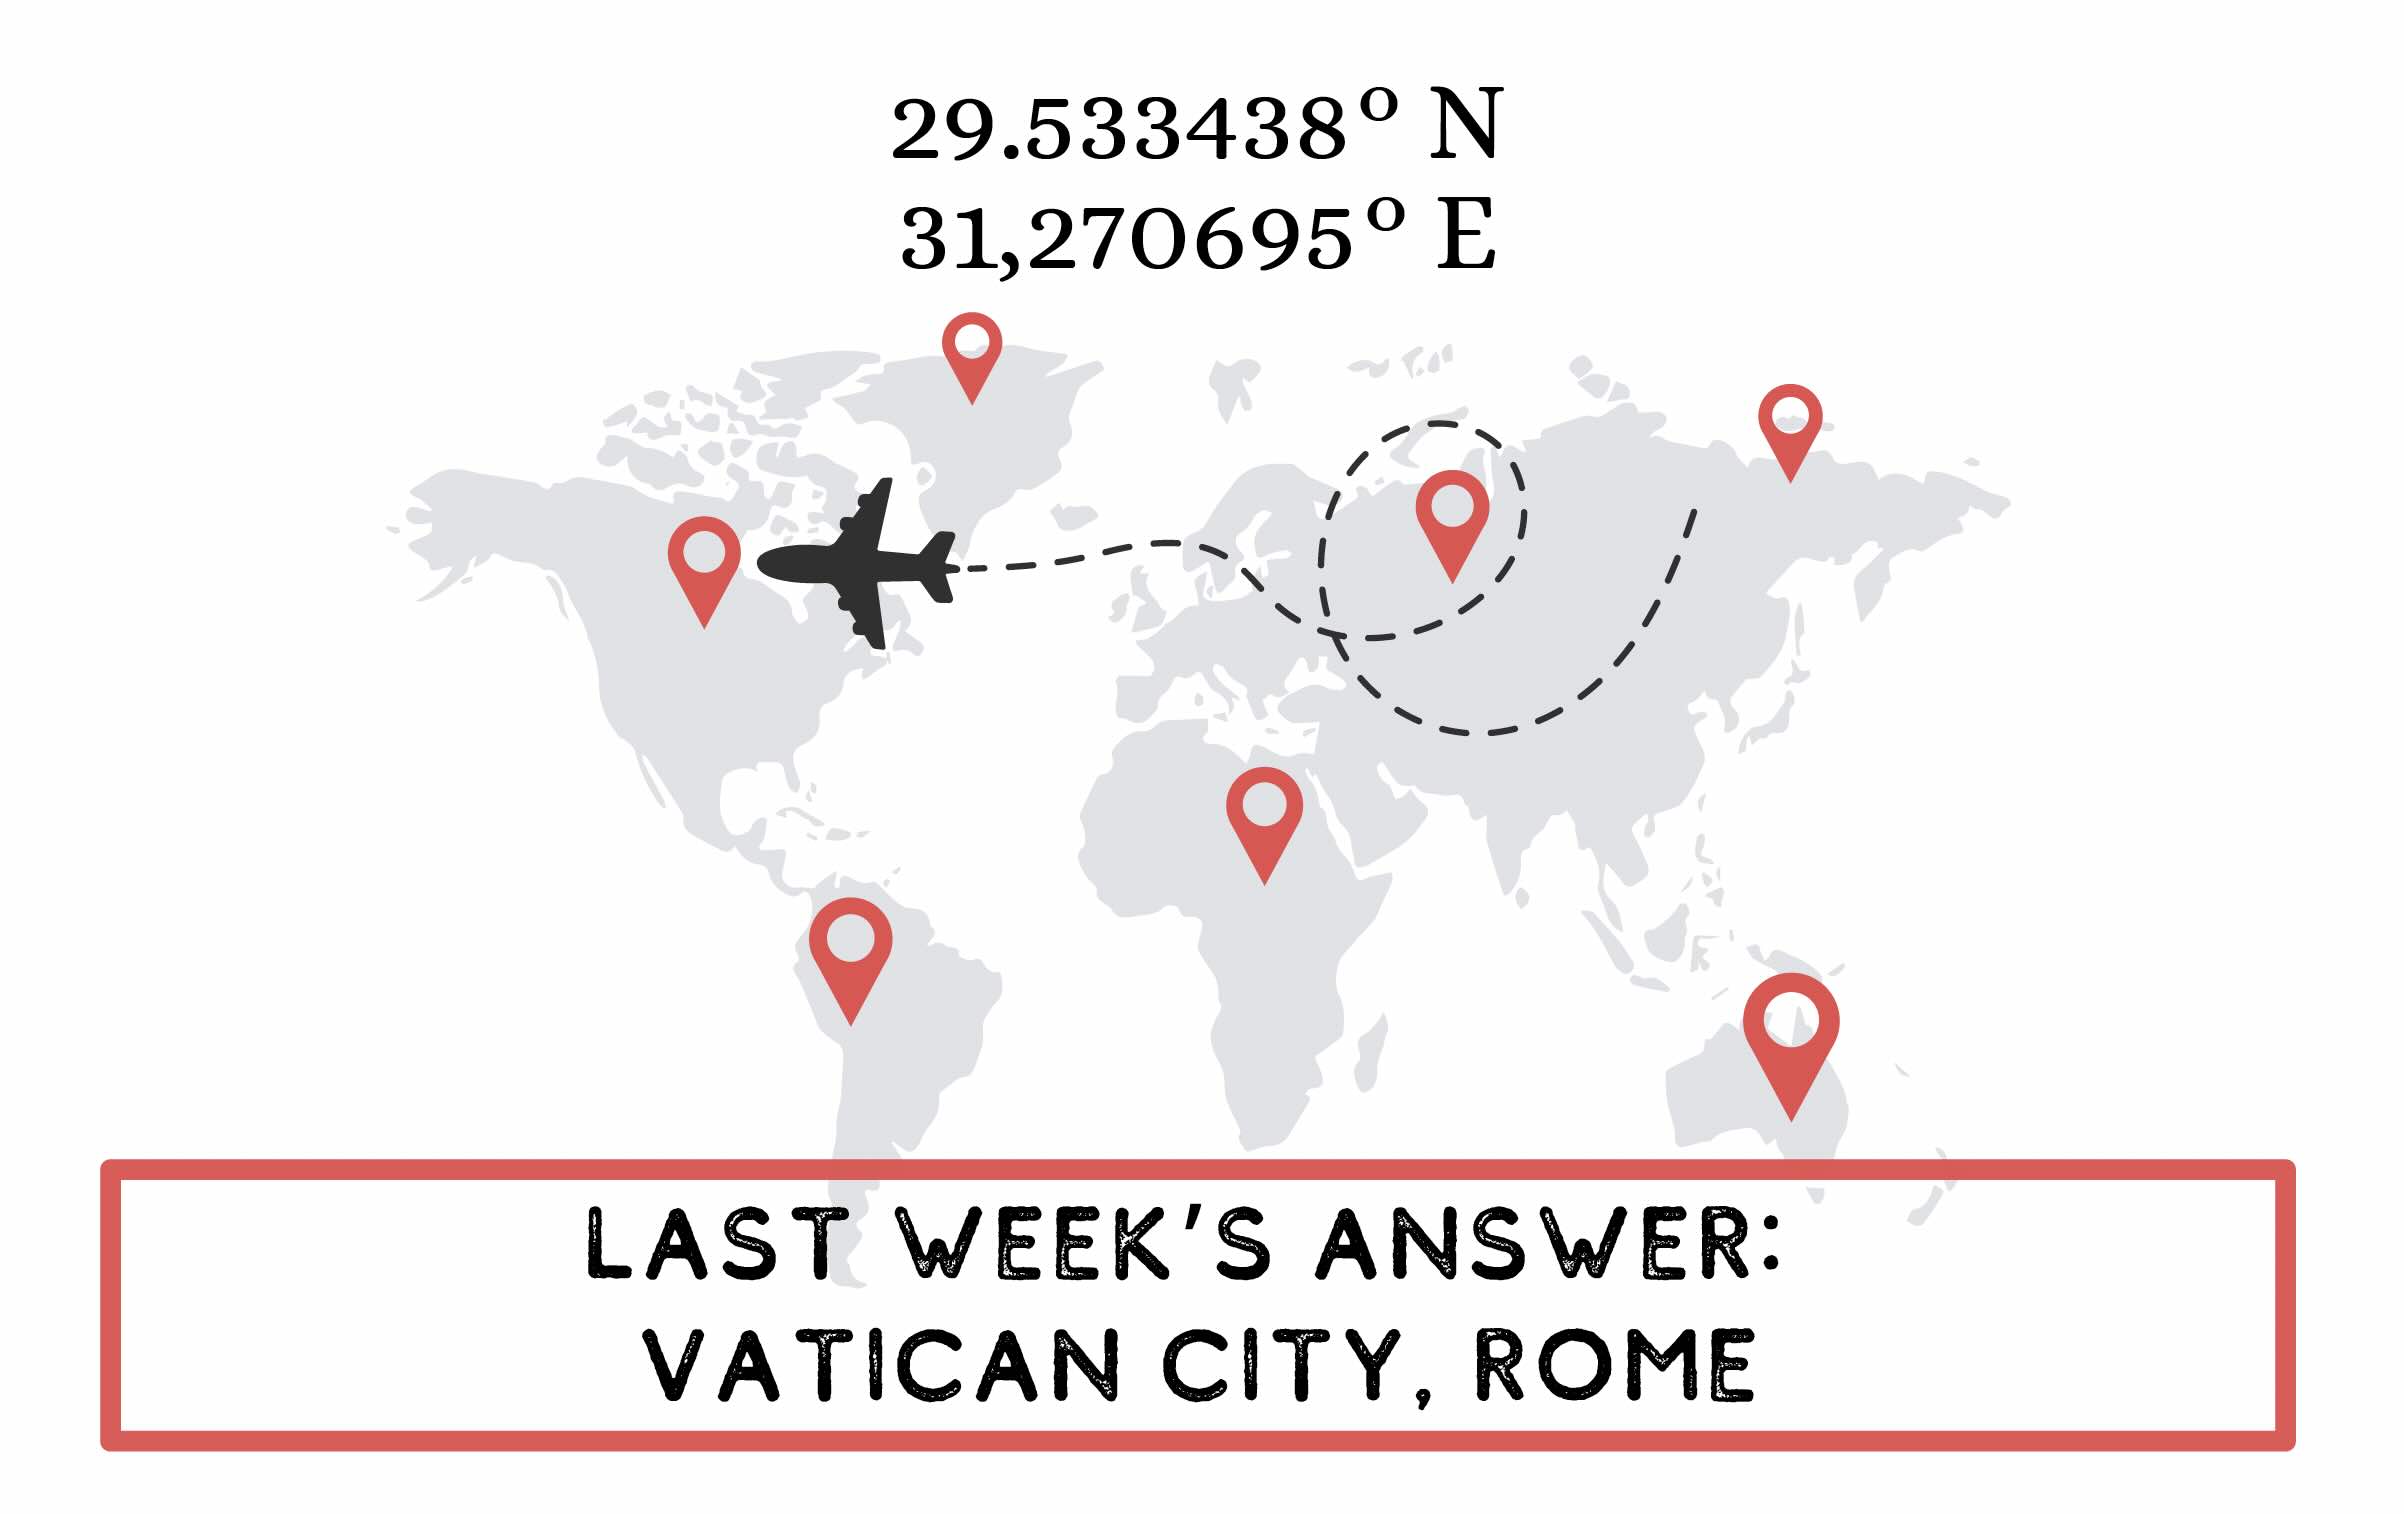 A map of the globe showing the coordinates: 29.533438° N 31,270695° E with, "Last week’s answer: Vatican City, Rome" at the bottom.